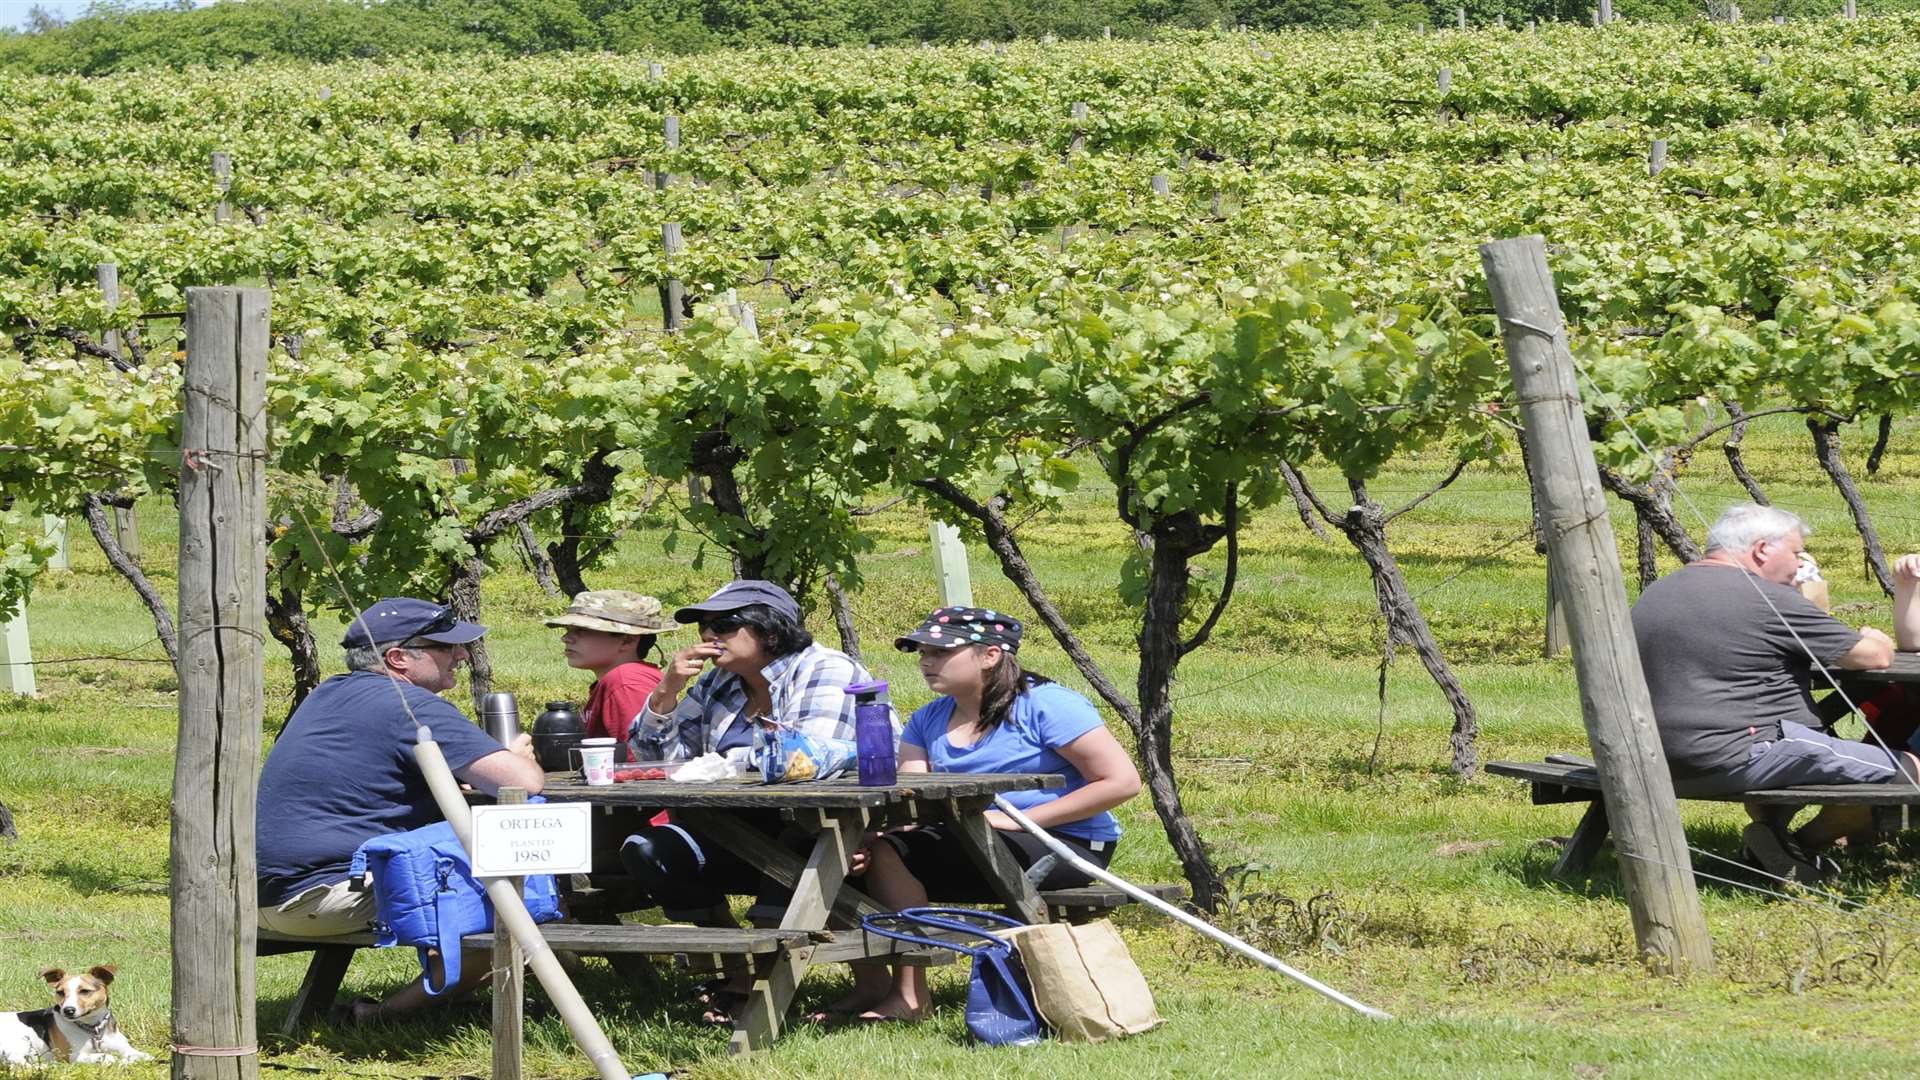 Picnic amongst the vines on a day out at Biddenden Vineyards